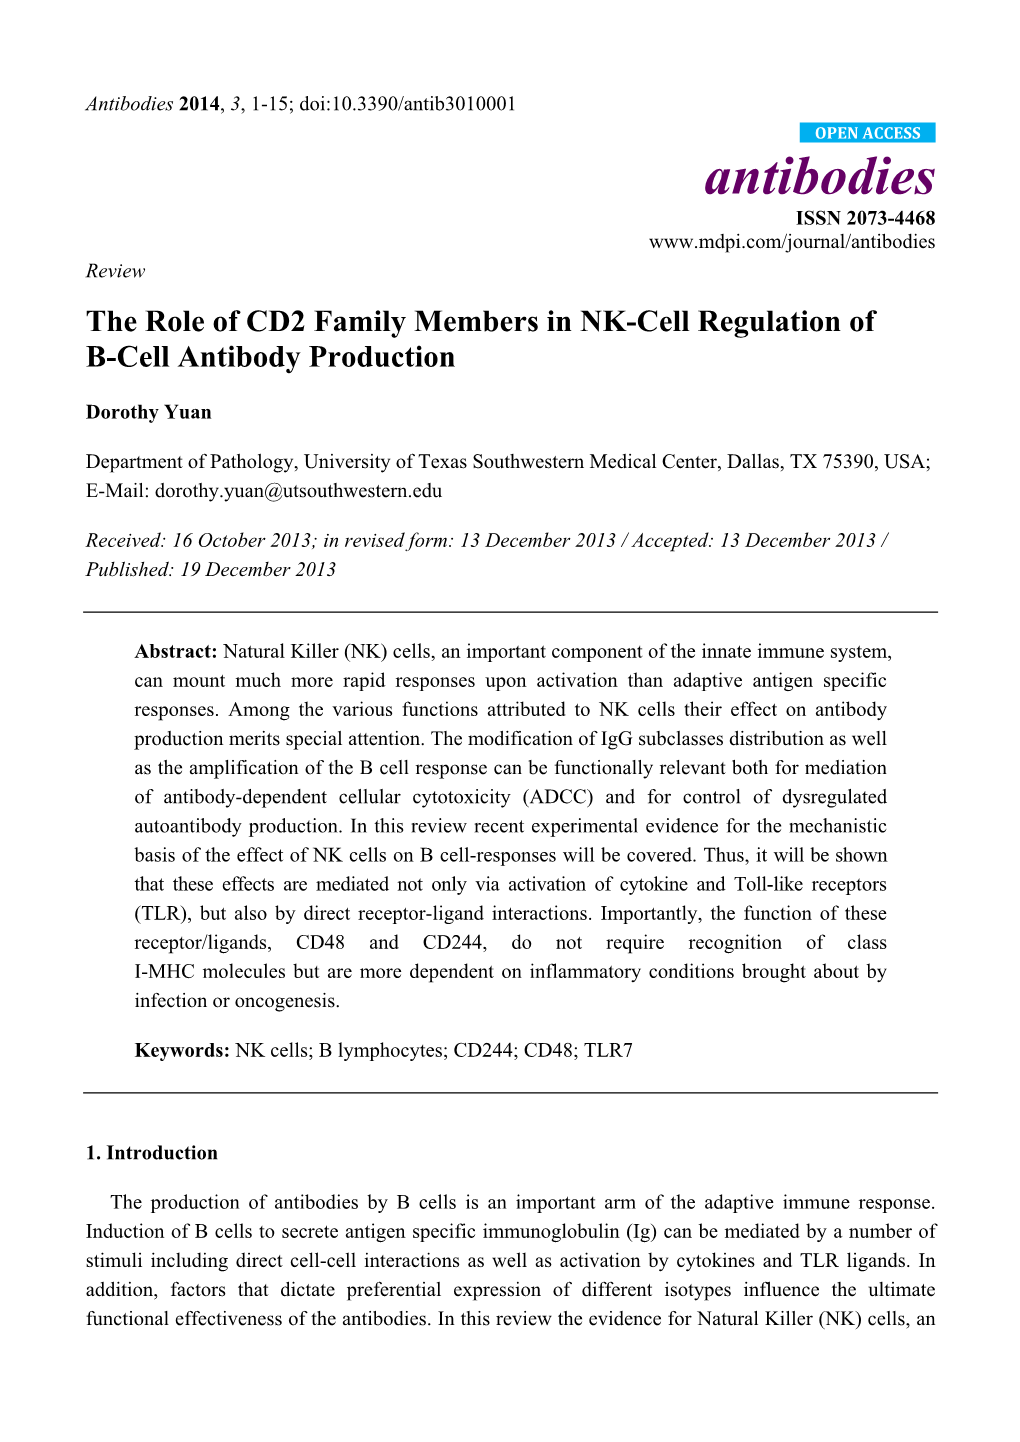 The Role of CD2 Family Members in NK-Cell Regulation of B-Cell Antibody Production